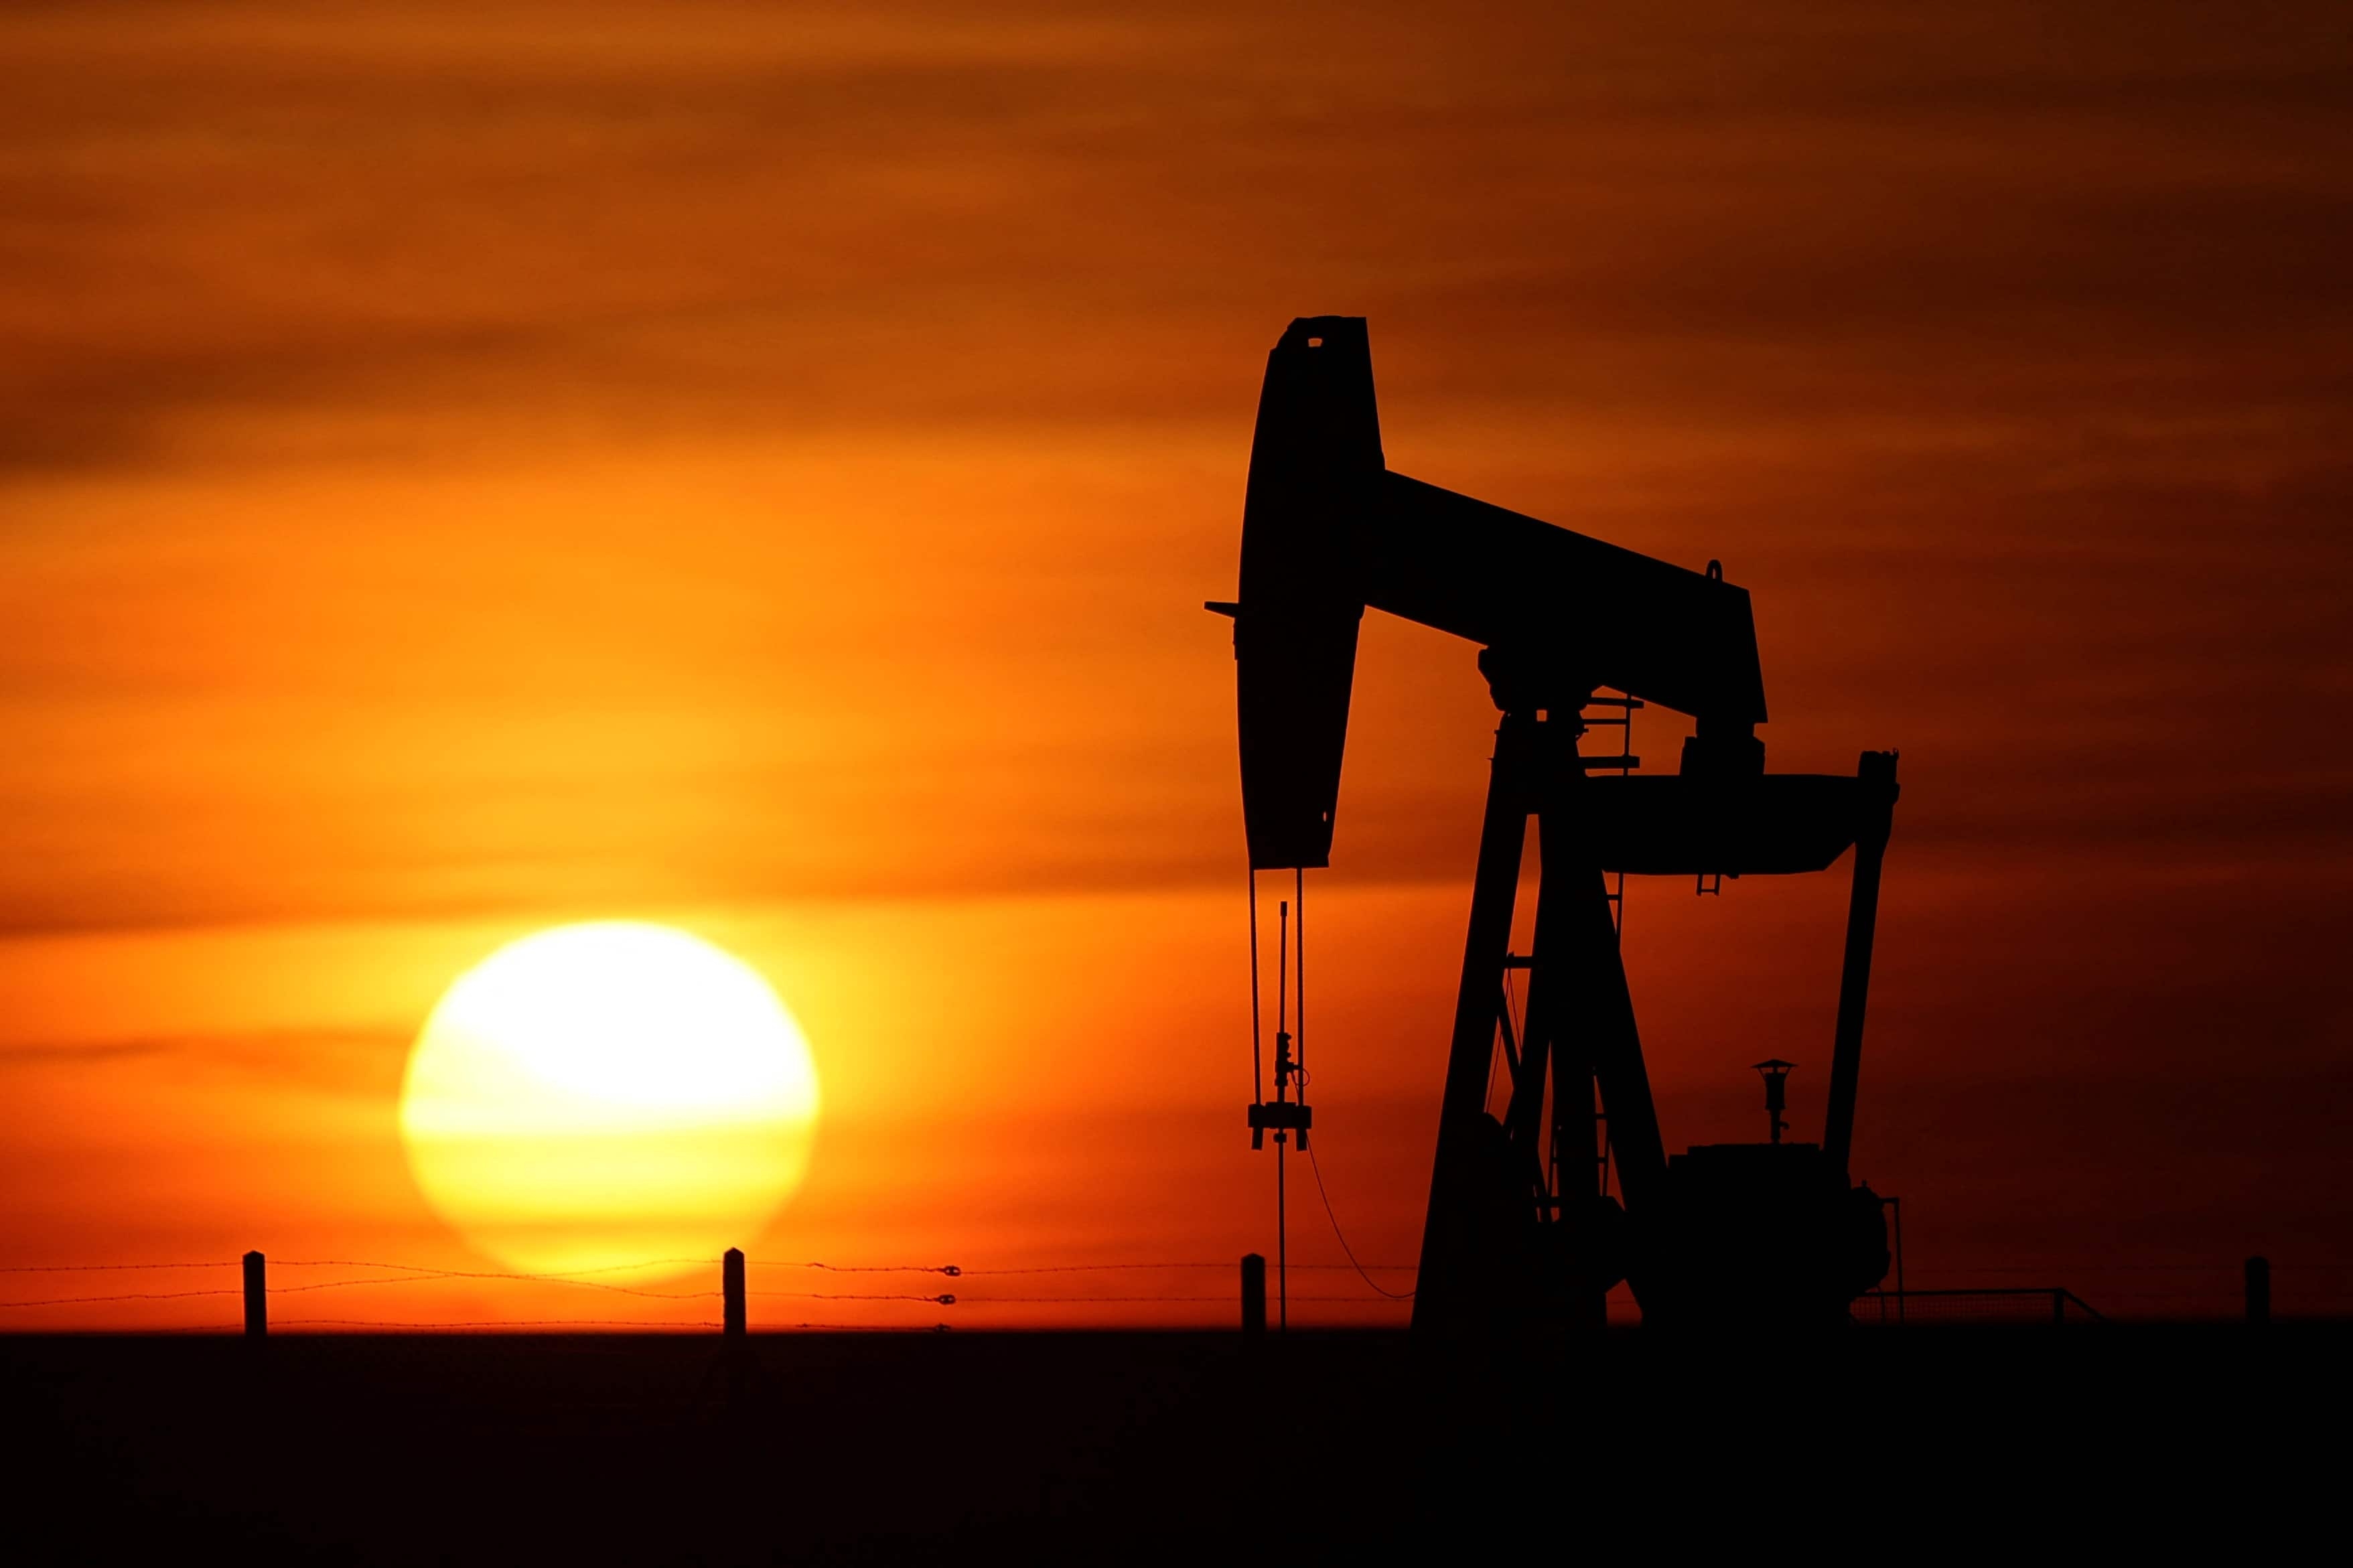 Oil prices rose more than 5 percent on Wednesday after flows of Russian gas to Europe fell and Russia sanctioned some European gas companies, adding to uncertainty in world energy markets. Brent crude settled up $5.05, or 4.9 percent, to $107.51 a barrel, while US West Texas Intermediate crude climbed $5.95 a barrel to $105.71, a 6 percent increase.